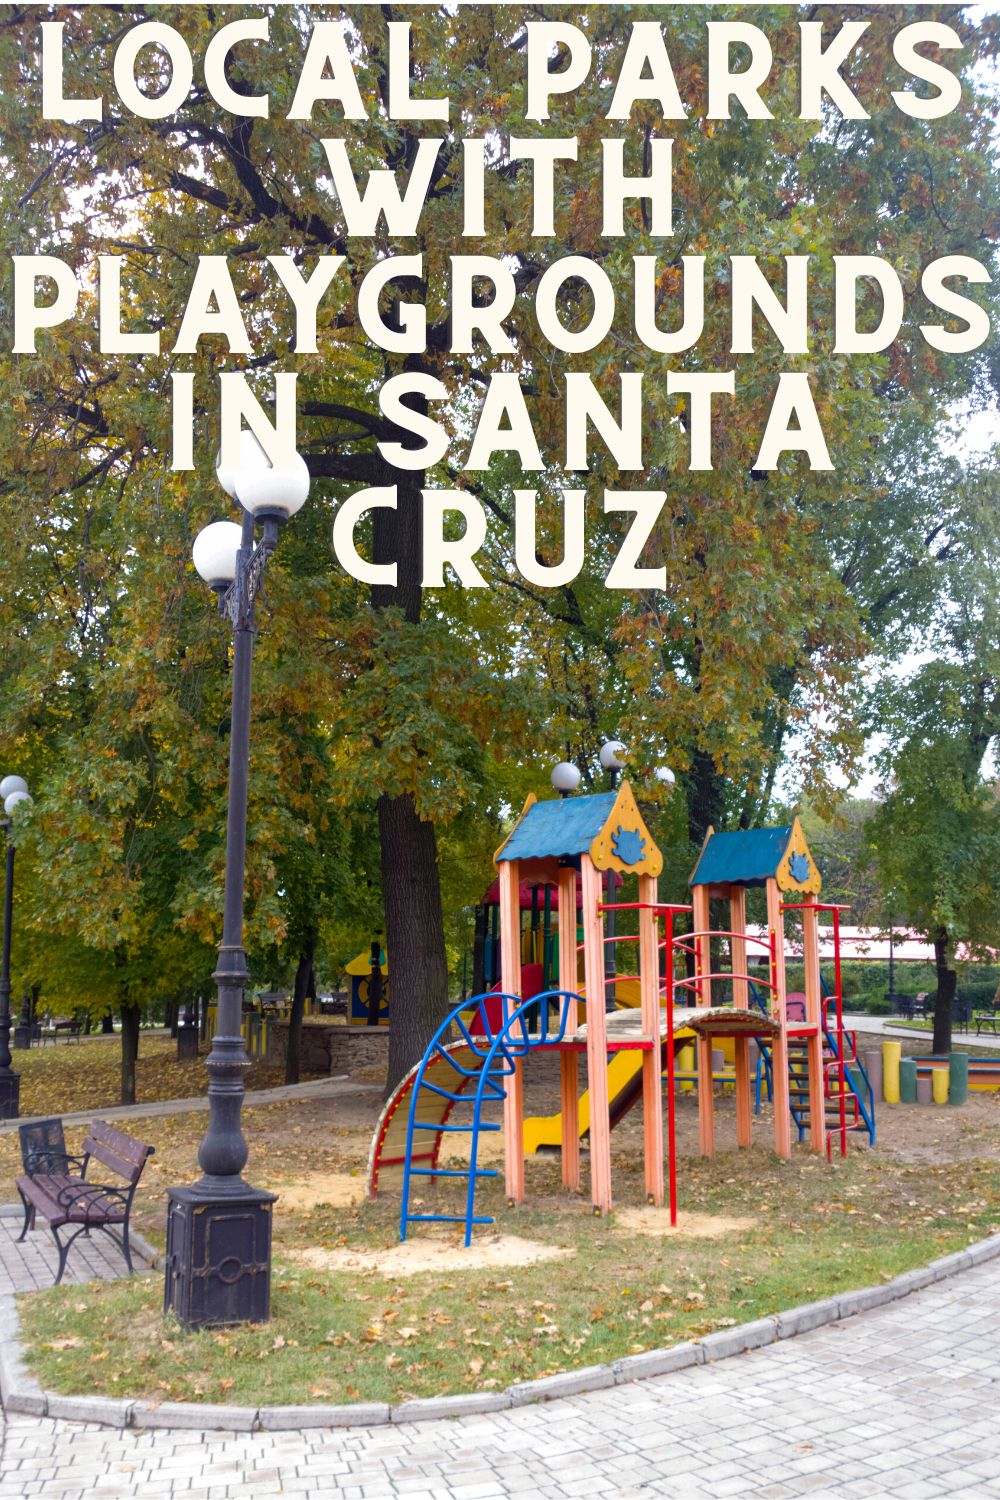 Local Parks with Playgrounds in Santa Cruz